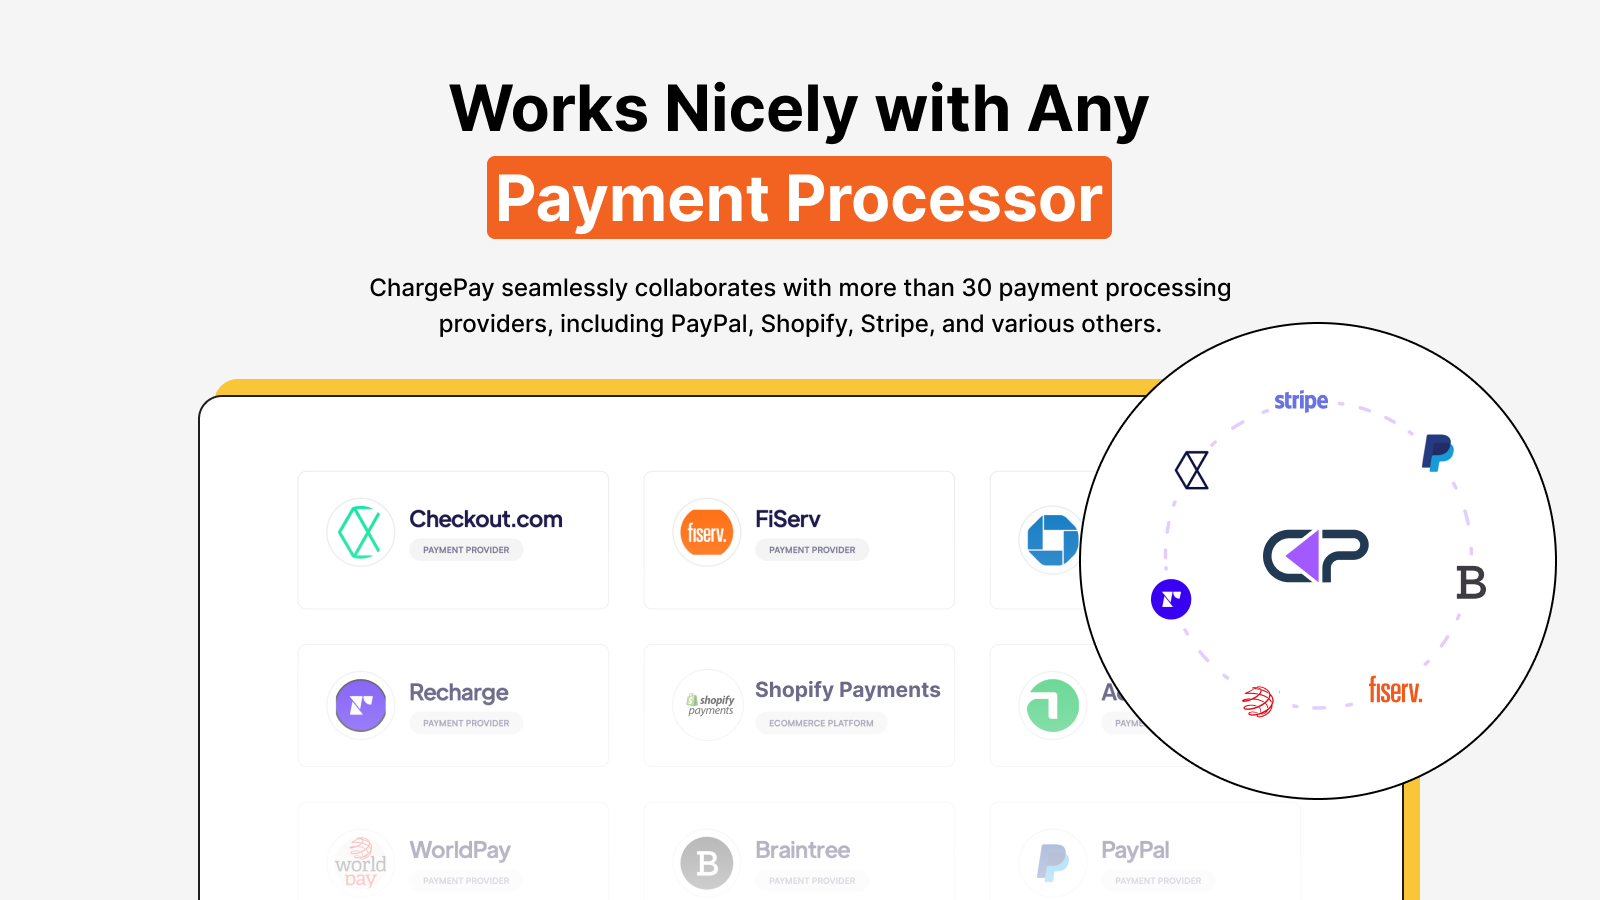 ChargePay works with any payment processor, win chargebacks!